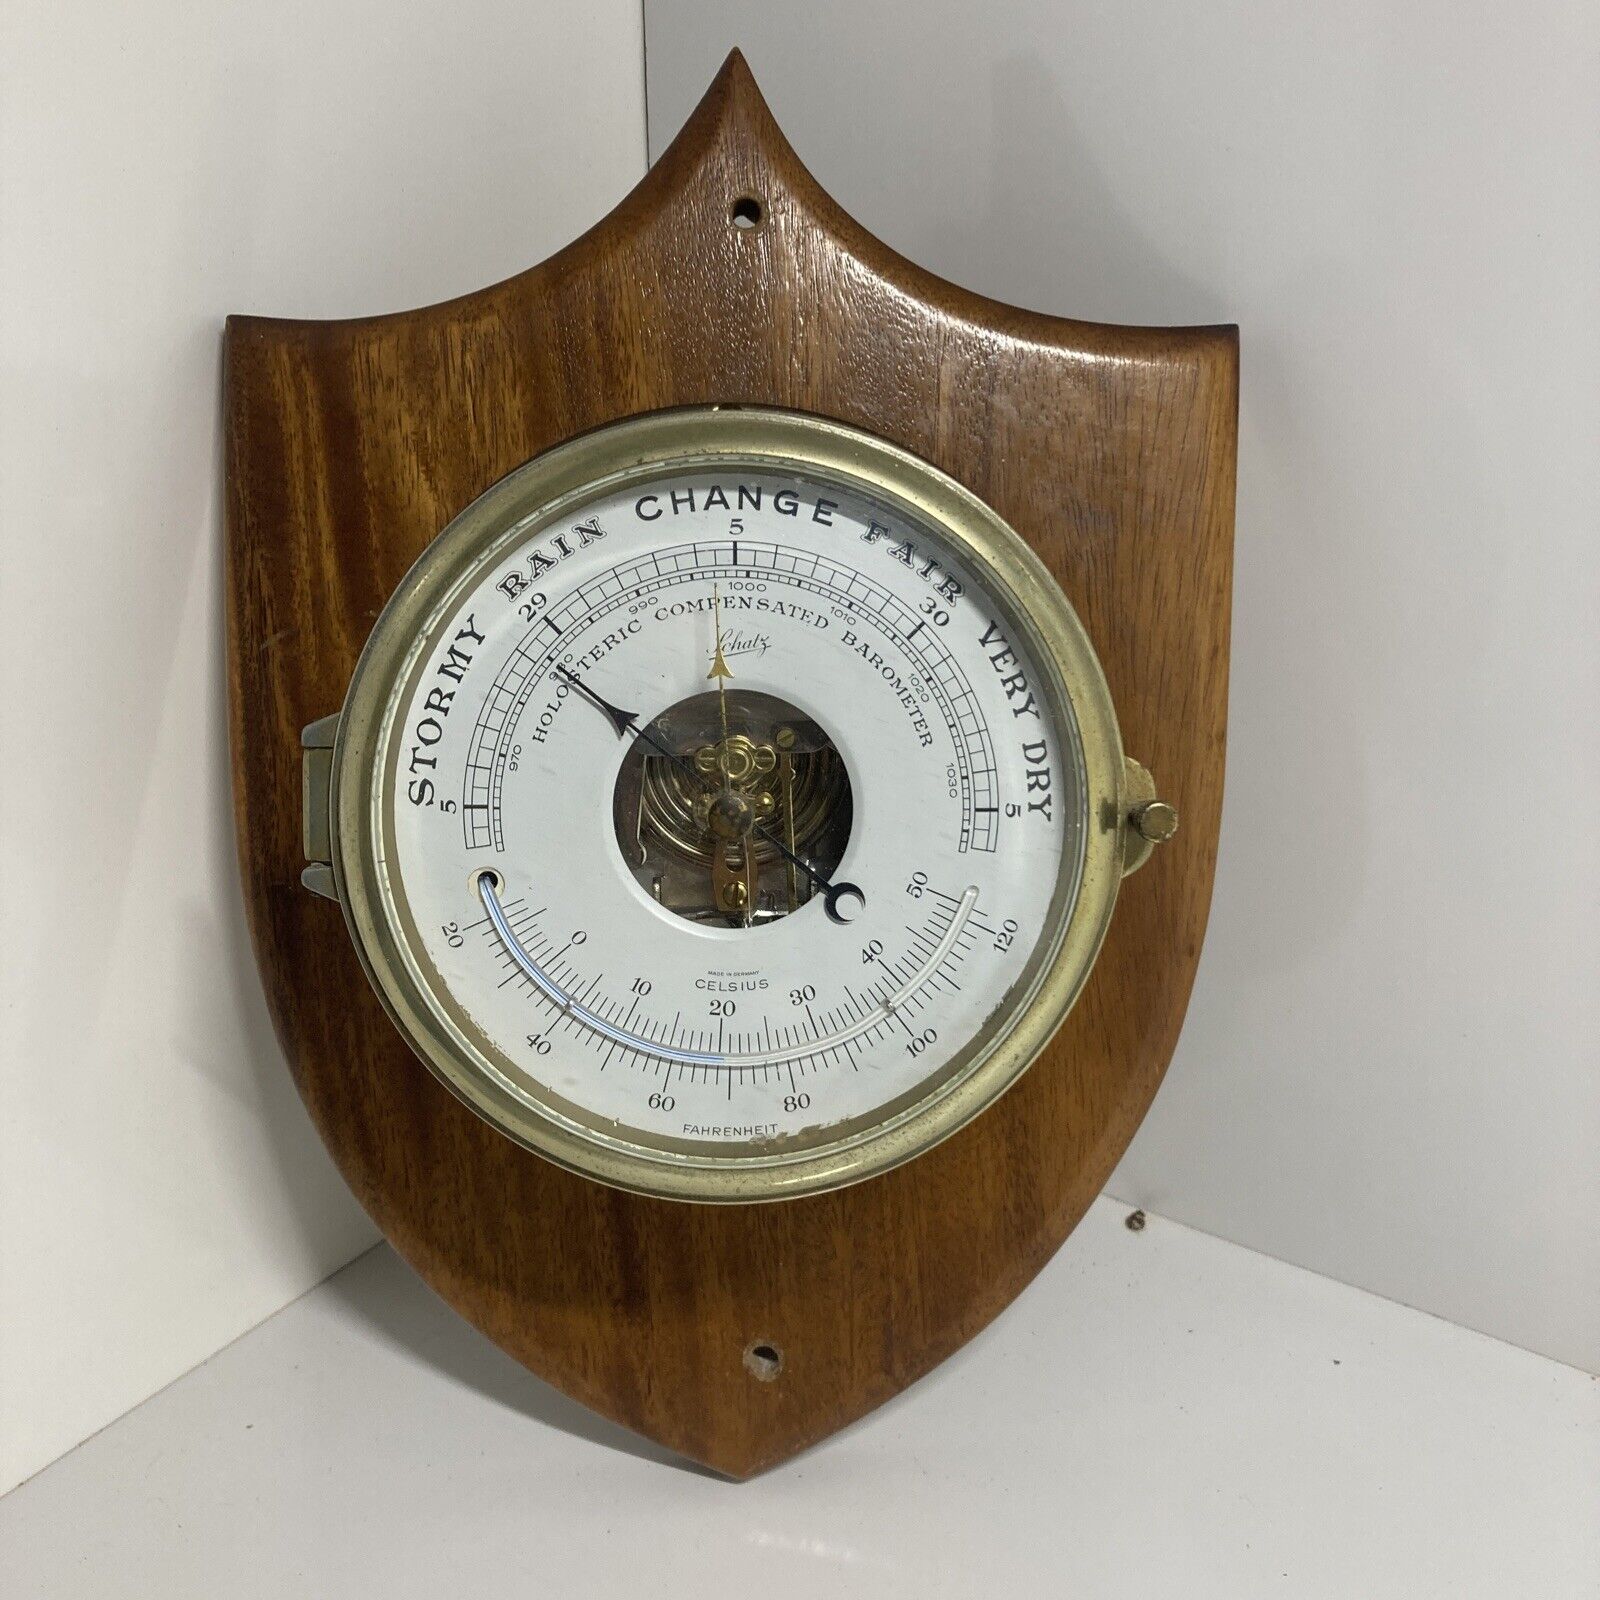 Schatz Brass Ships Compensated Precision Barometer & Thermometer, West Germany